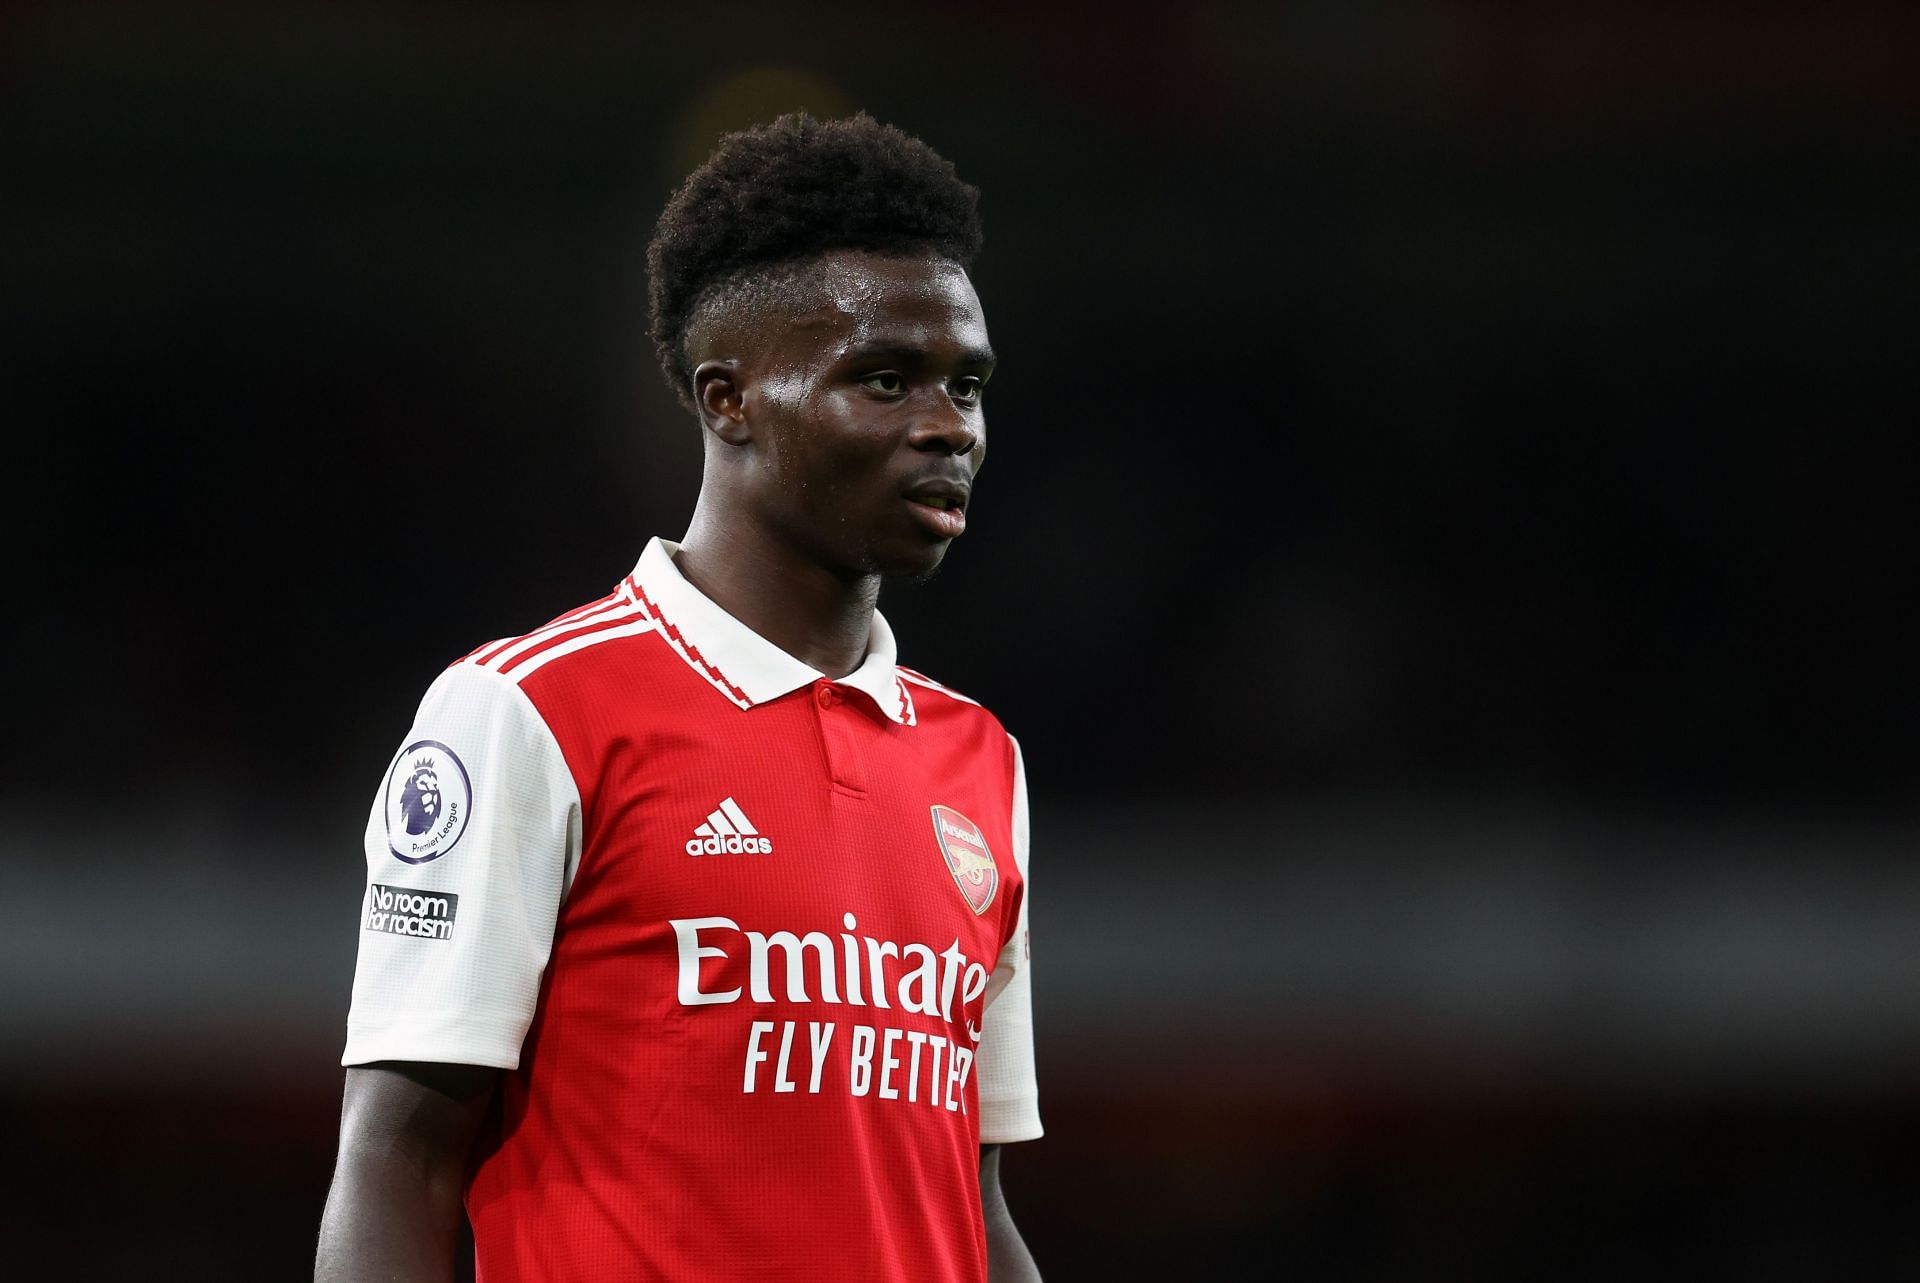 Bukayo Saka is one of the brightest young talents in European football.